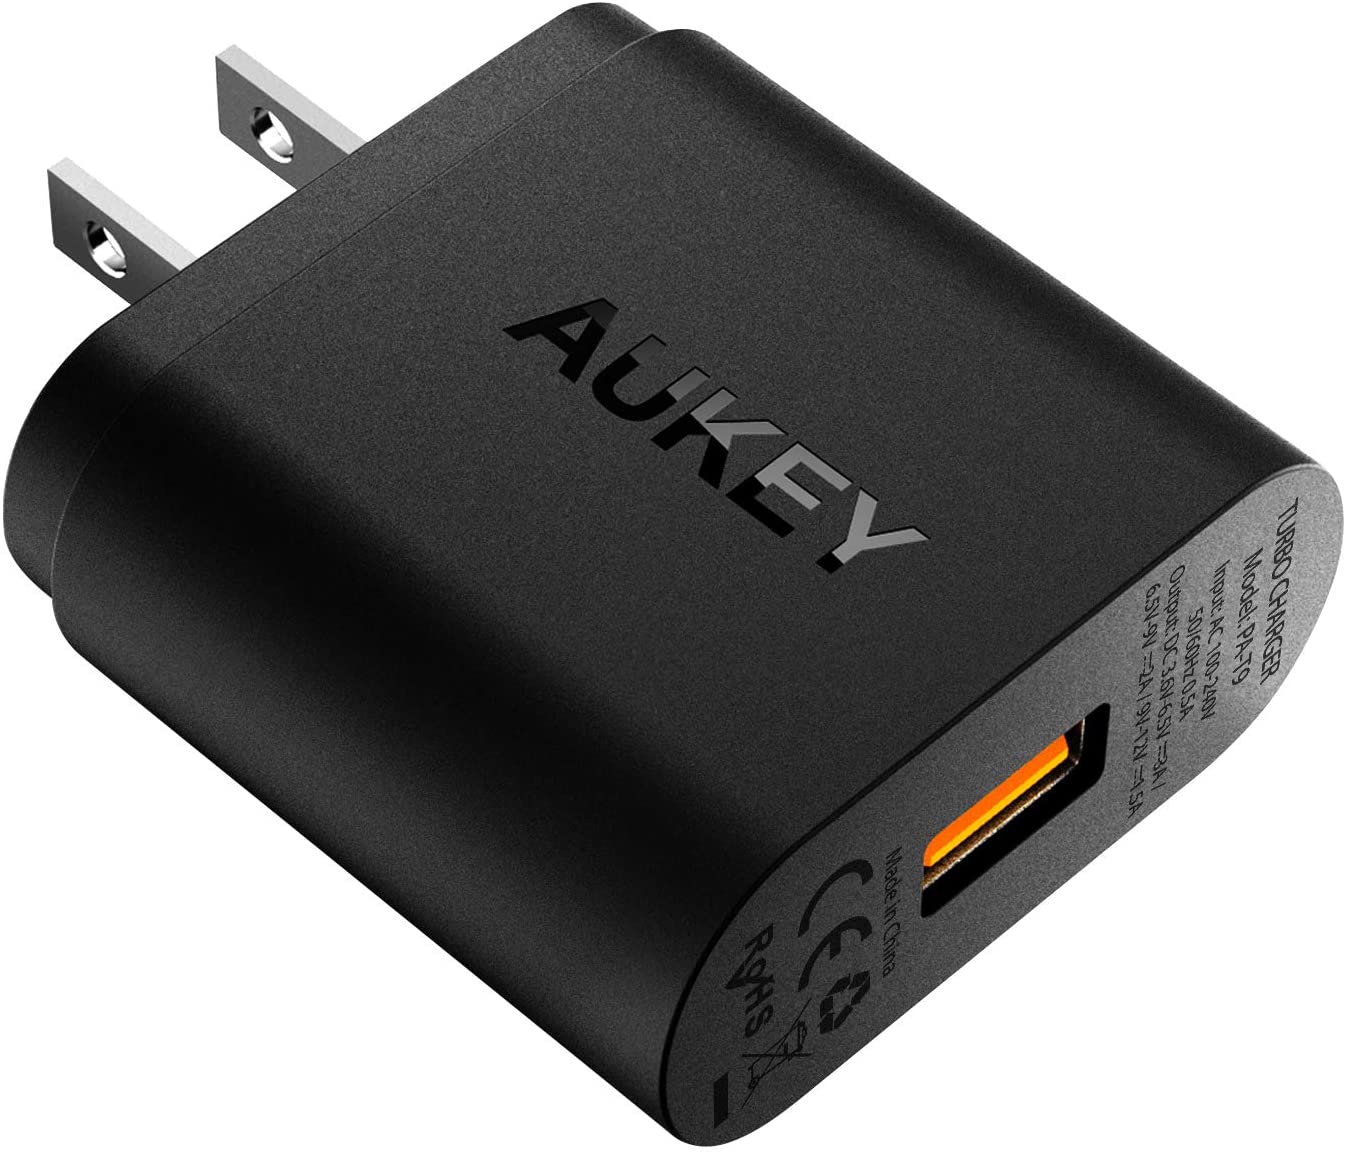 Geek Daily Deals 091520 aukey quick charger